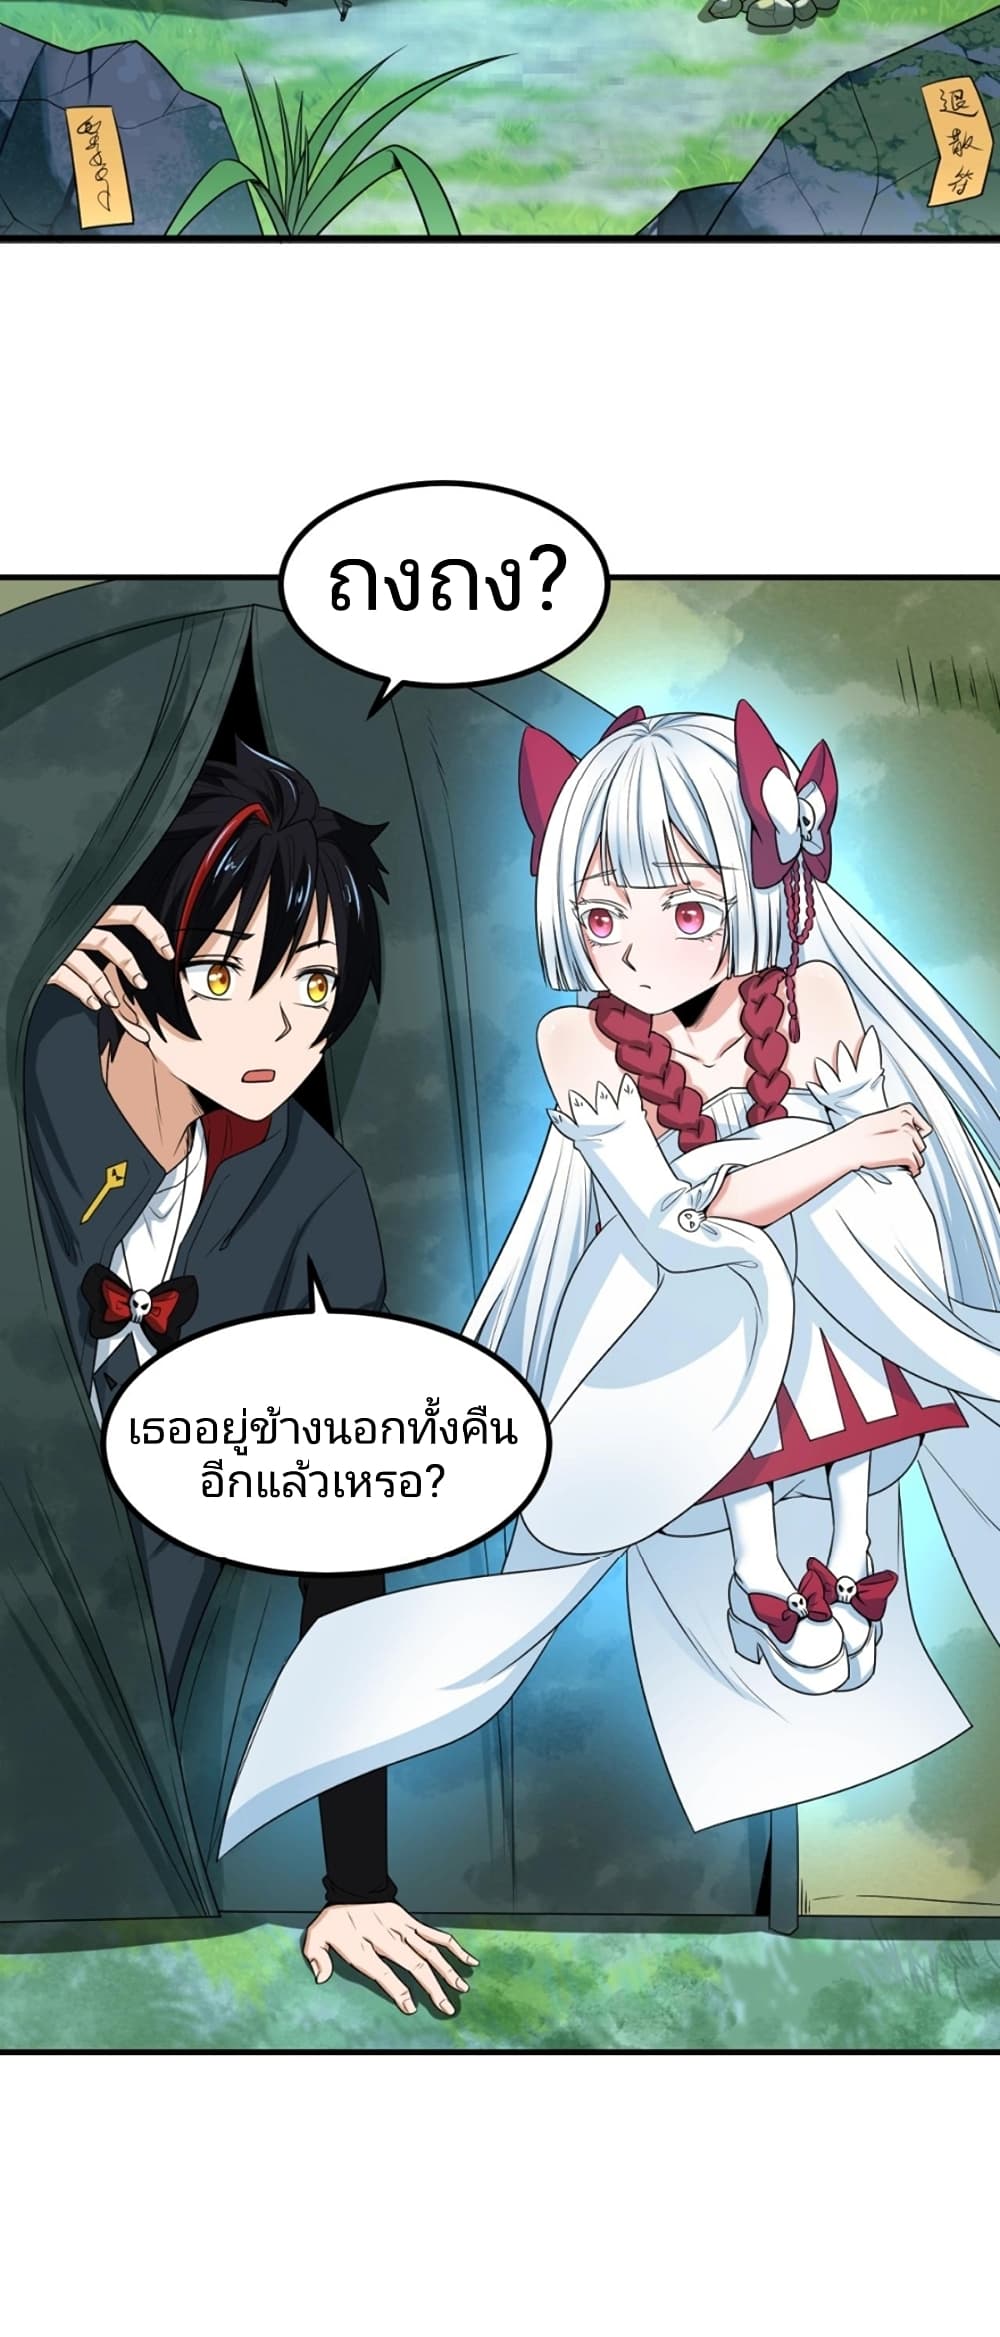 The Age of Ghost Spirits à¸à¸­à¸à¸à¸µà¹ 9 (9)